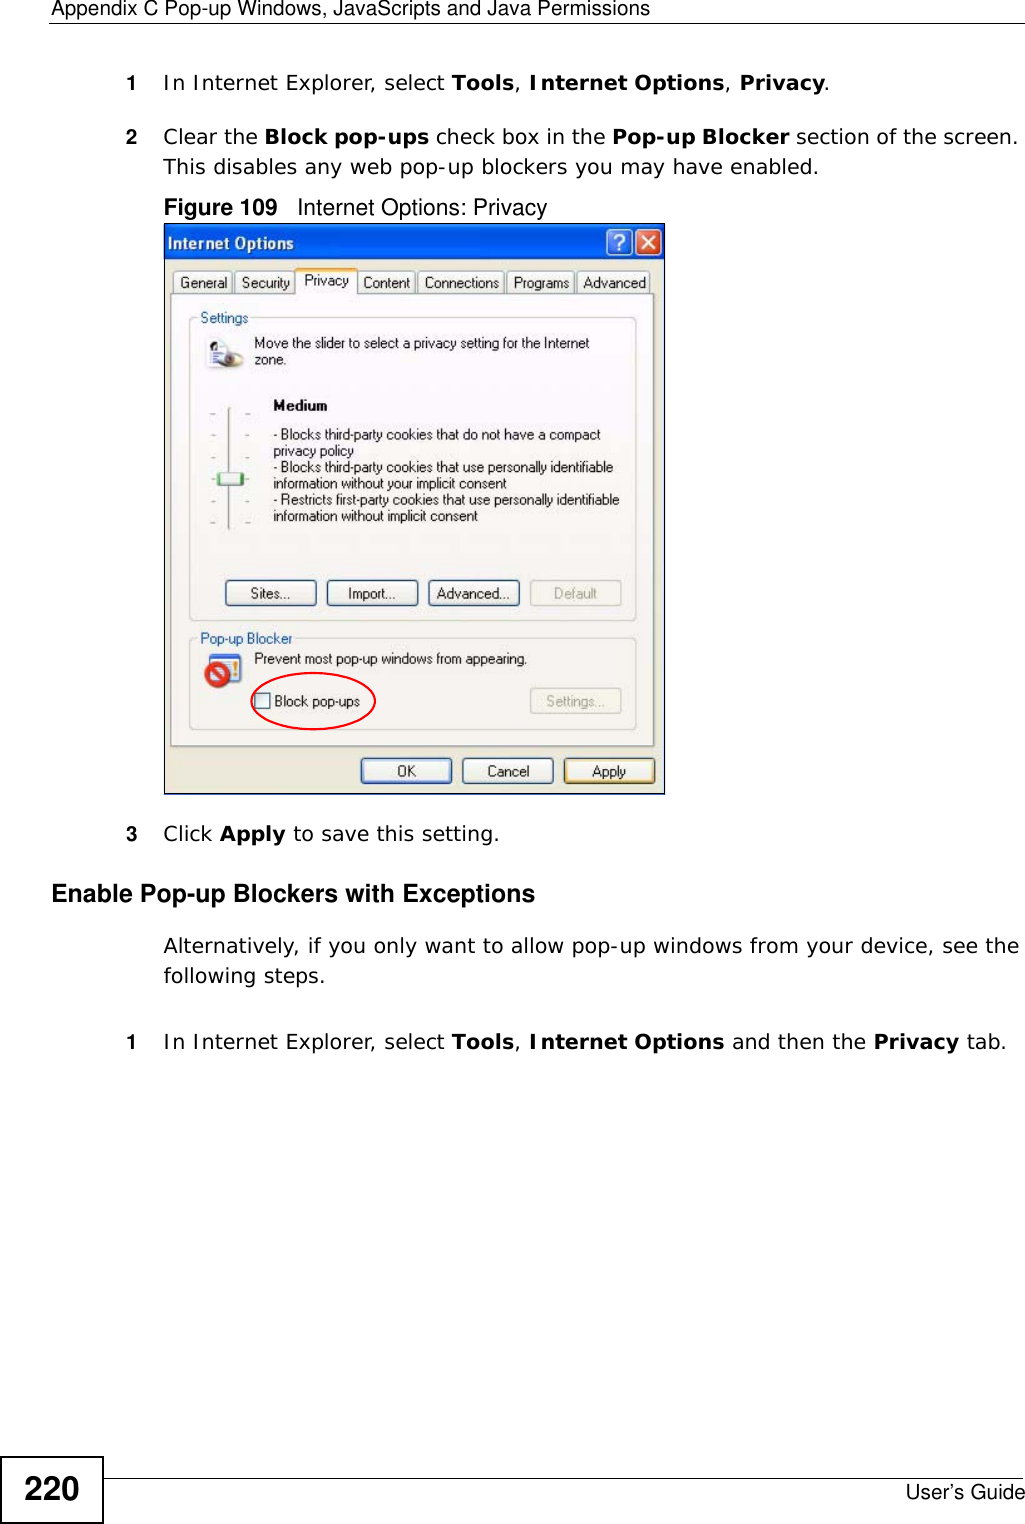 Appendix C Pop-up Windows, JavaScripts and Java PermissionsUser’s Guide2201In Internet Explorer, select Tools, Internet Options, Privacy.2Clear the Block pop-ups check box in the Pop-up Blocker section of the screen. This disables any web pop-up blockers you may have enabled. Figure 109   Internet Options: Privacy3Click Apply to save this setting.Enable Pop-up Blockers with ExceptionsAlternatively, if you only want to allow pop-up windows from your device, see the following steps.1In Internet Explorer, select Tools, Internet Options and then the Privacy tab. 